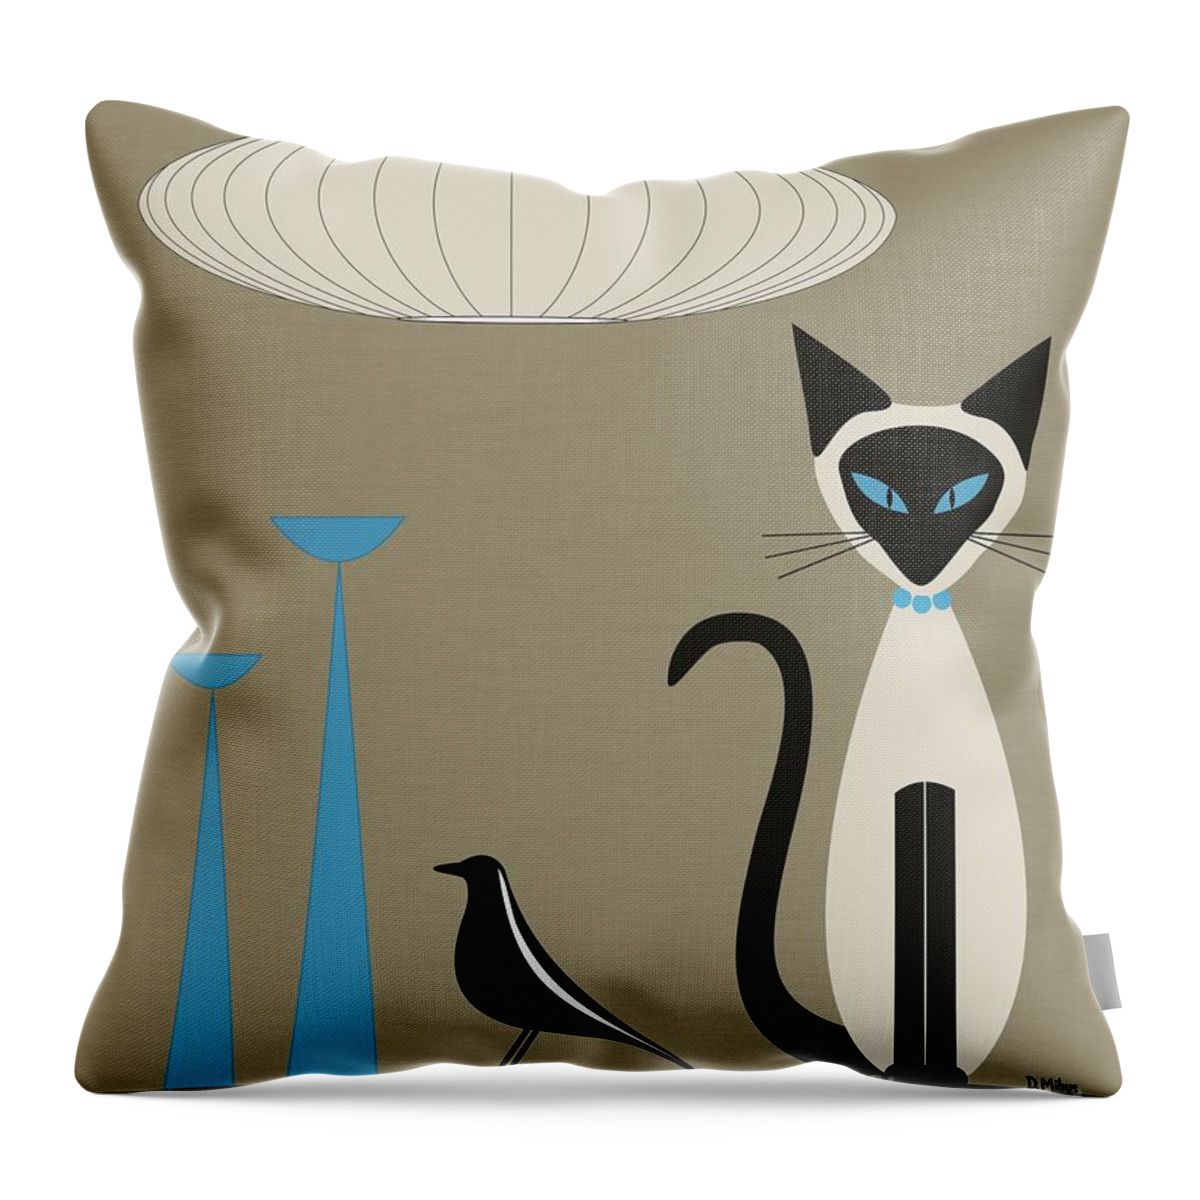 Mid Century Modern Throw Pillow featuring the digital art Tabletop Siamese Blue by Donna Mibus